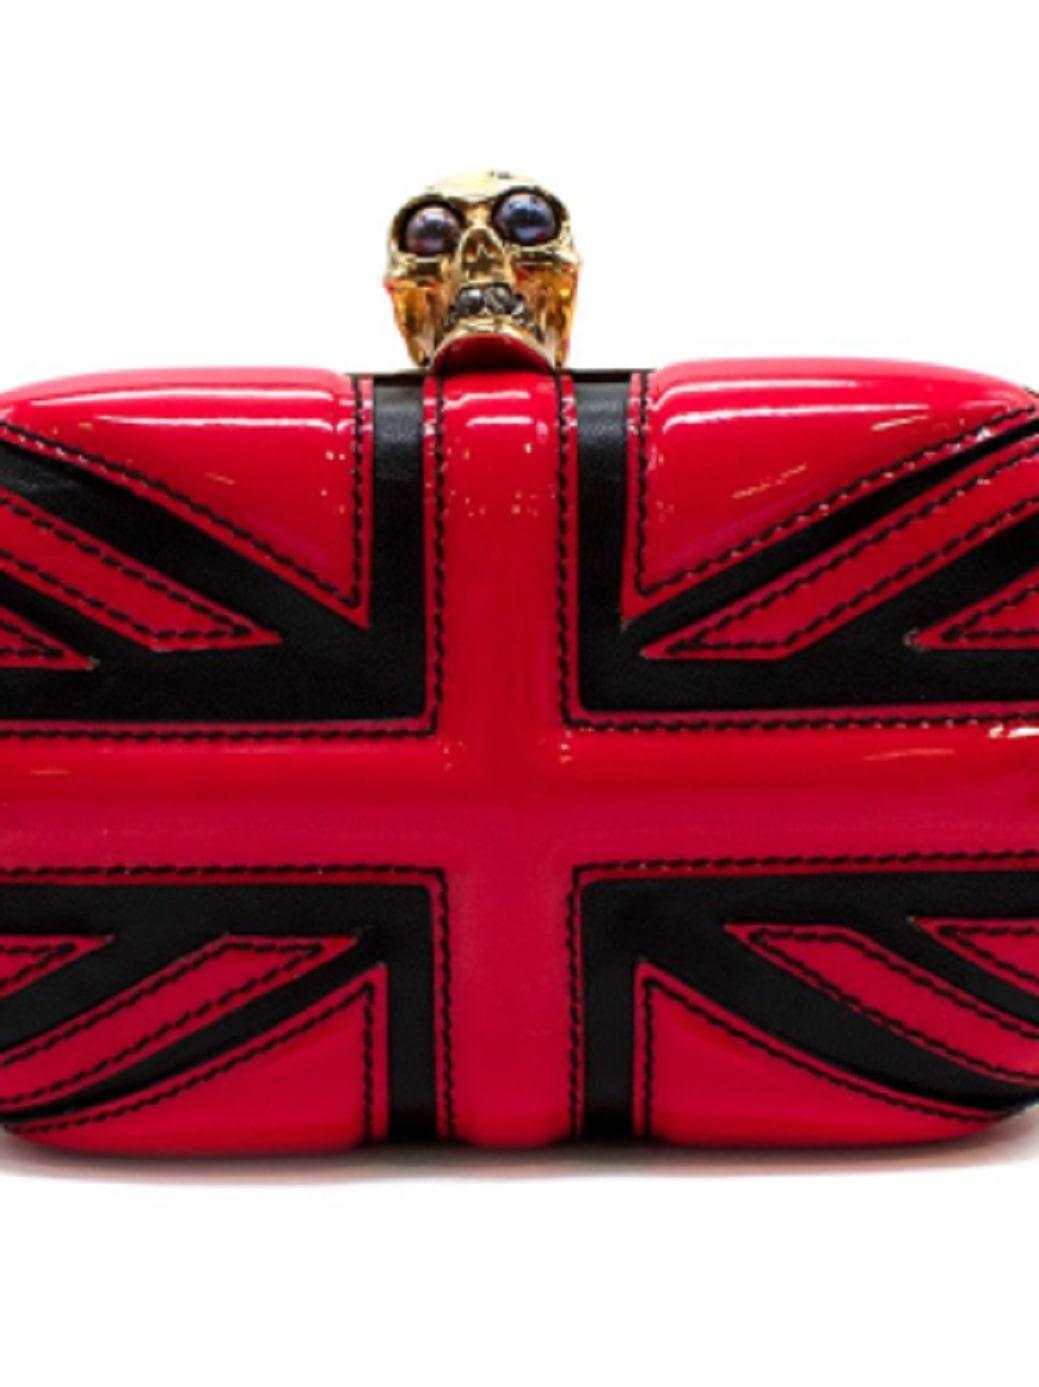 Alexander McQueen Red Patent-leather Union Jack Clutch

-Gold tone hardware 
-Push skull clasp 
-One main compartment
-Red and black english flag body 

Material: 

Leather 

Made in France 

PLEASE NOTE, THESE ITEMS ARE PRE-OWNED AND MAY SHOW SIGNS